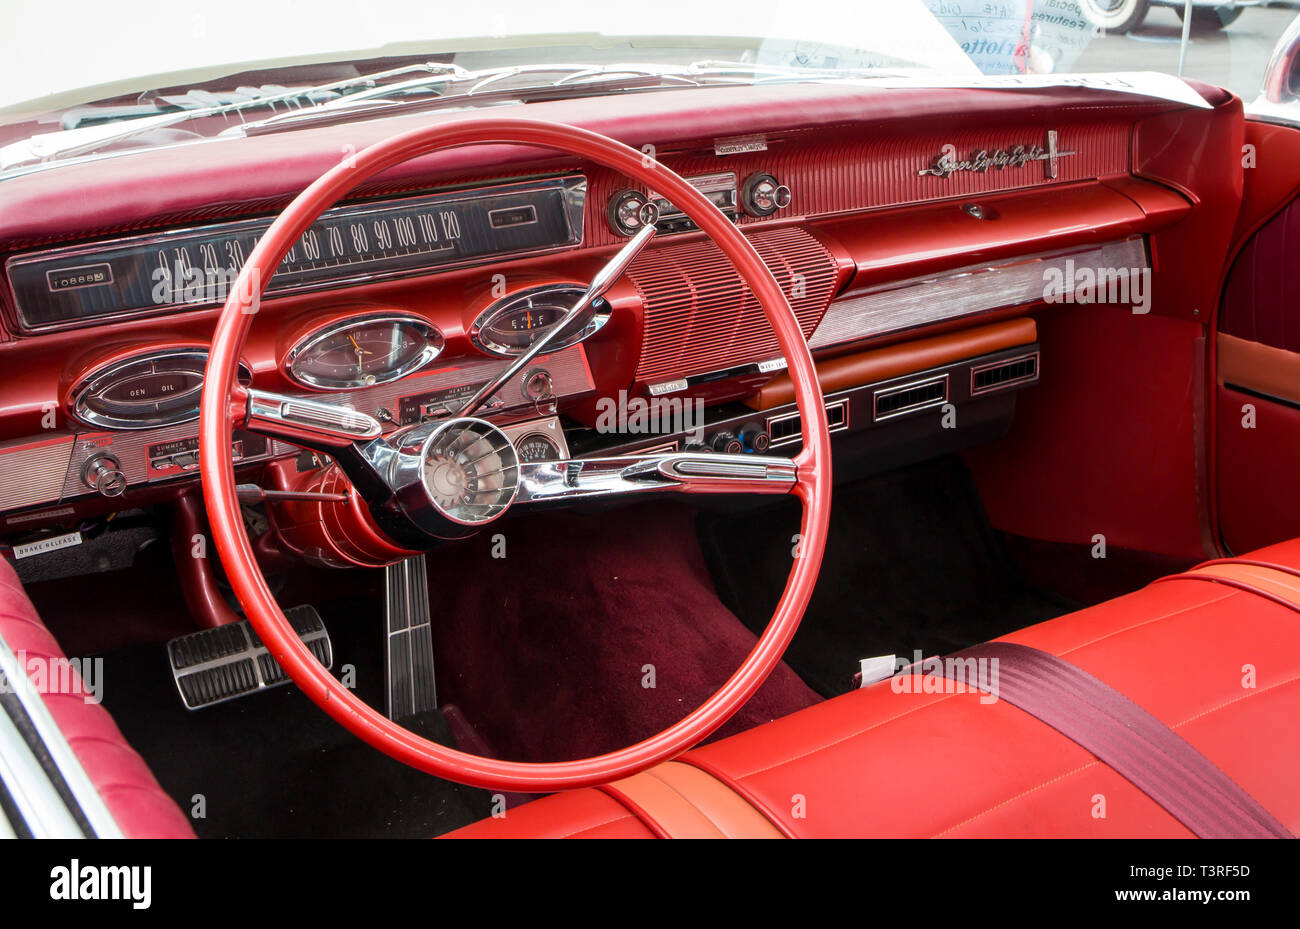 tray Lounge Calm CONCORD, NC (USA) - April 6, 2019: Interior of a 1961 Oldsmobile Super 88  automobile on display at the Pennzoil AutoFair Classic Car Show at  Charlotte Stock Photo - Alamy